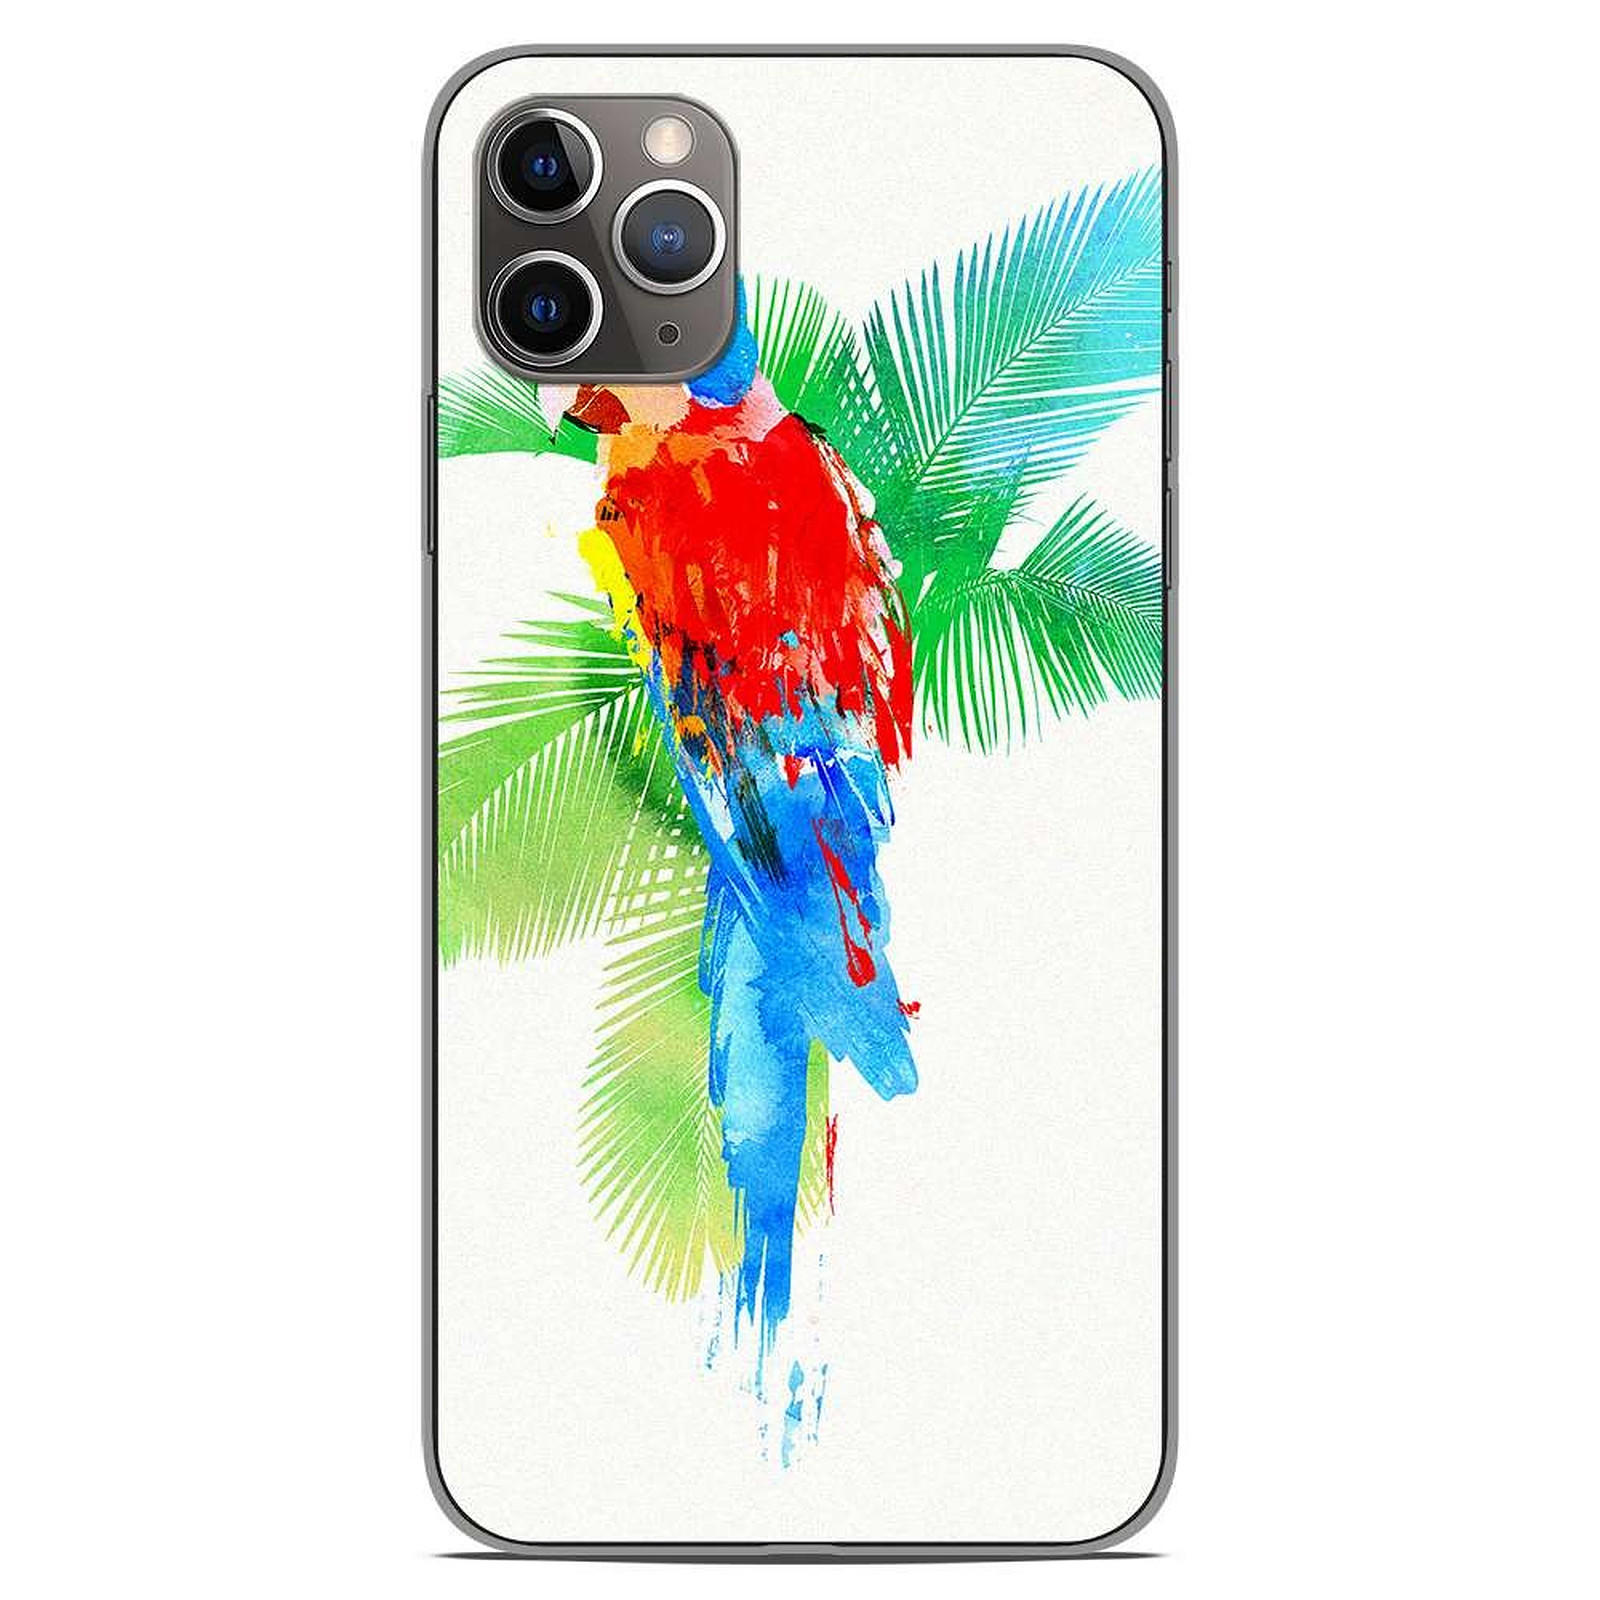 1001 Coques Coque silicone gel Apple iPhone 11 Pro Max motif RF Tropical party - Coque telephone 1001Coques